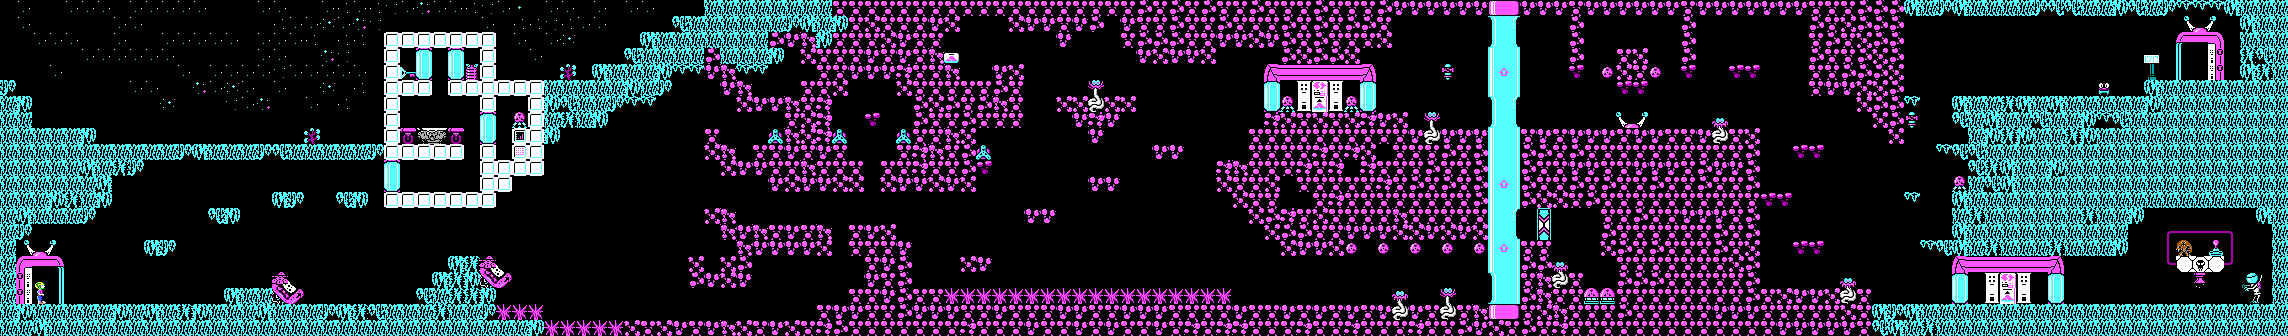 Commander Keen Confronts the Commandeered Planet - Level 15.png